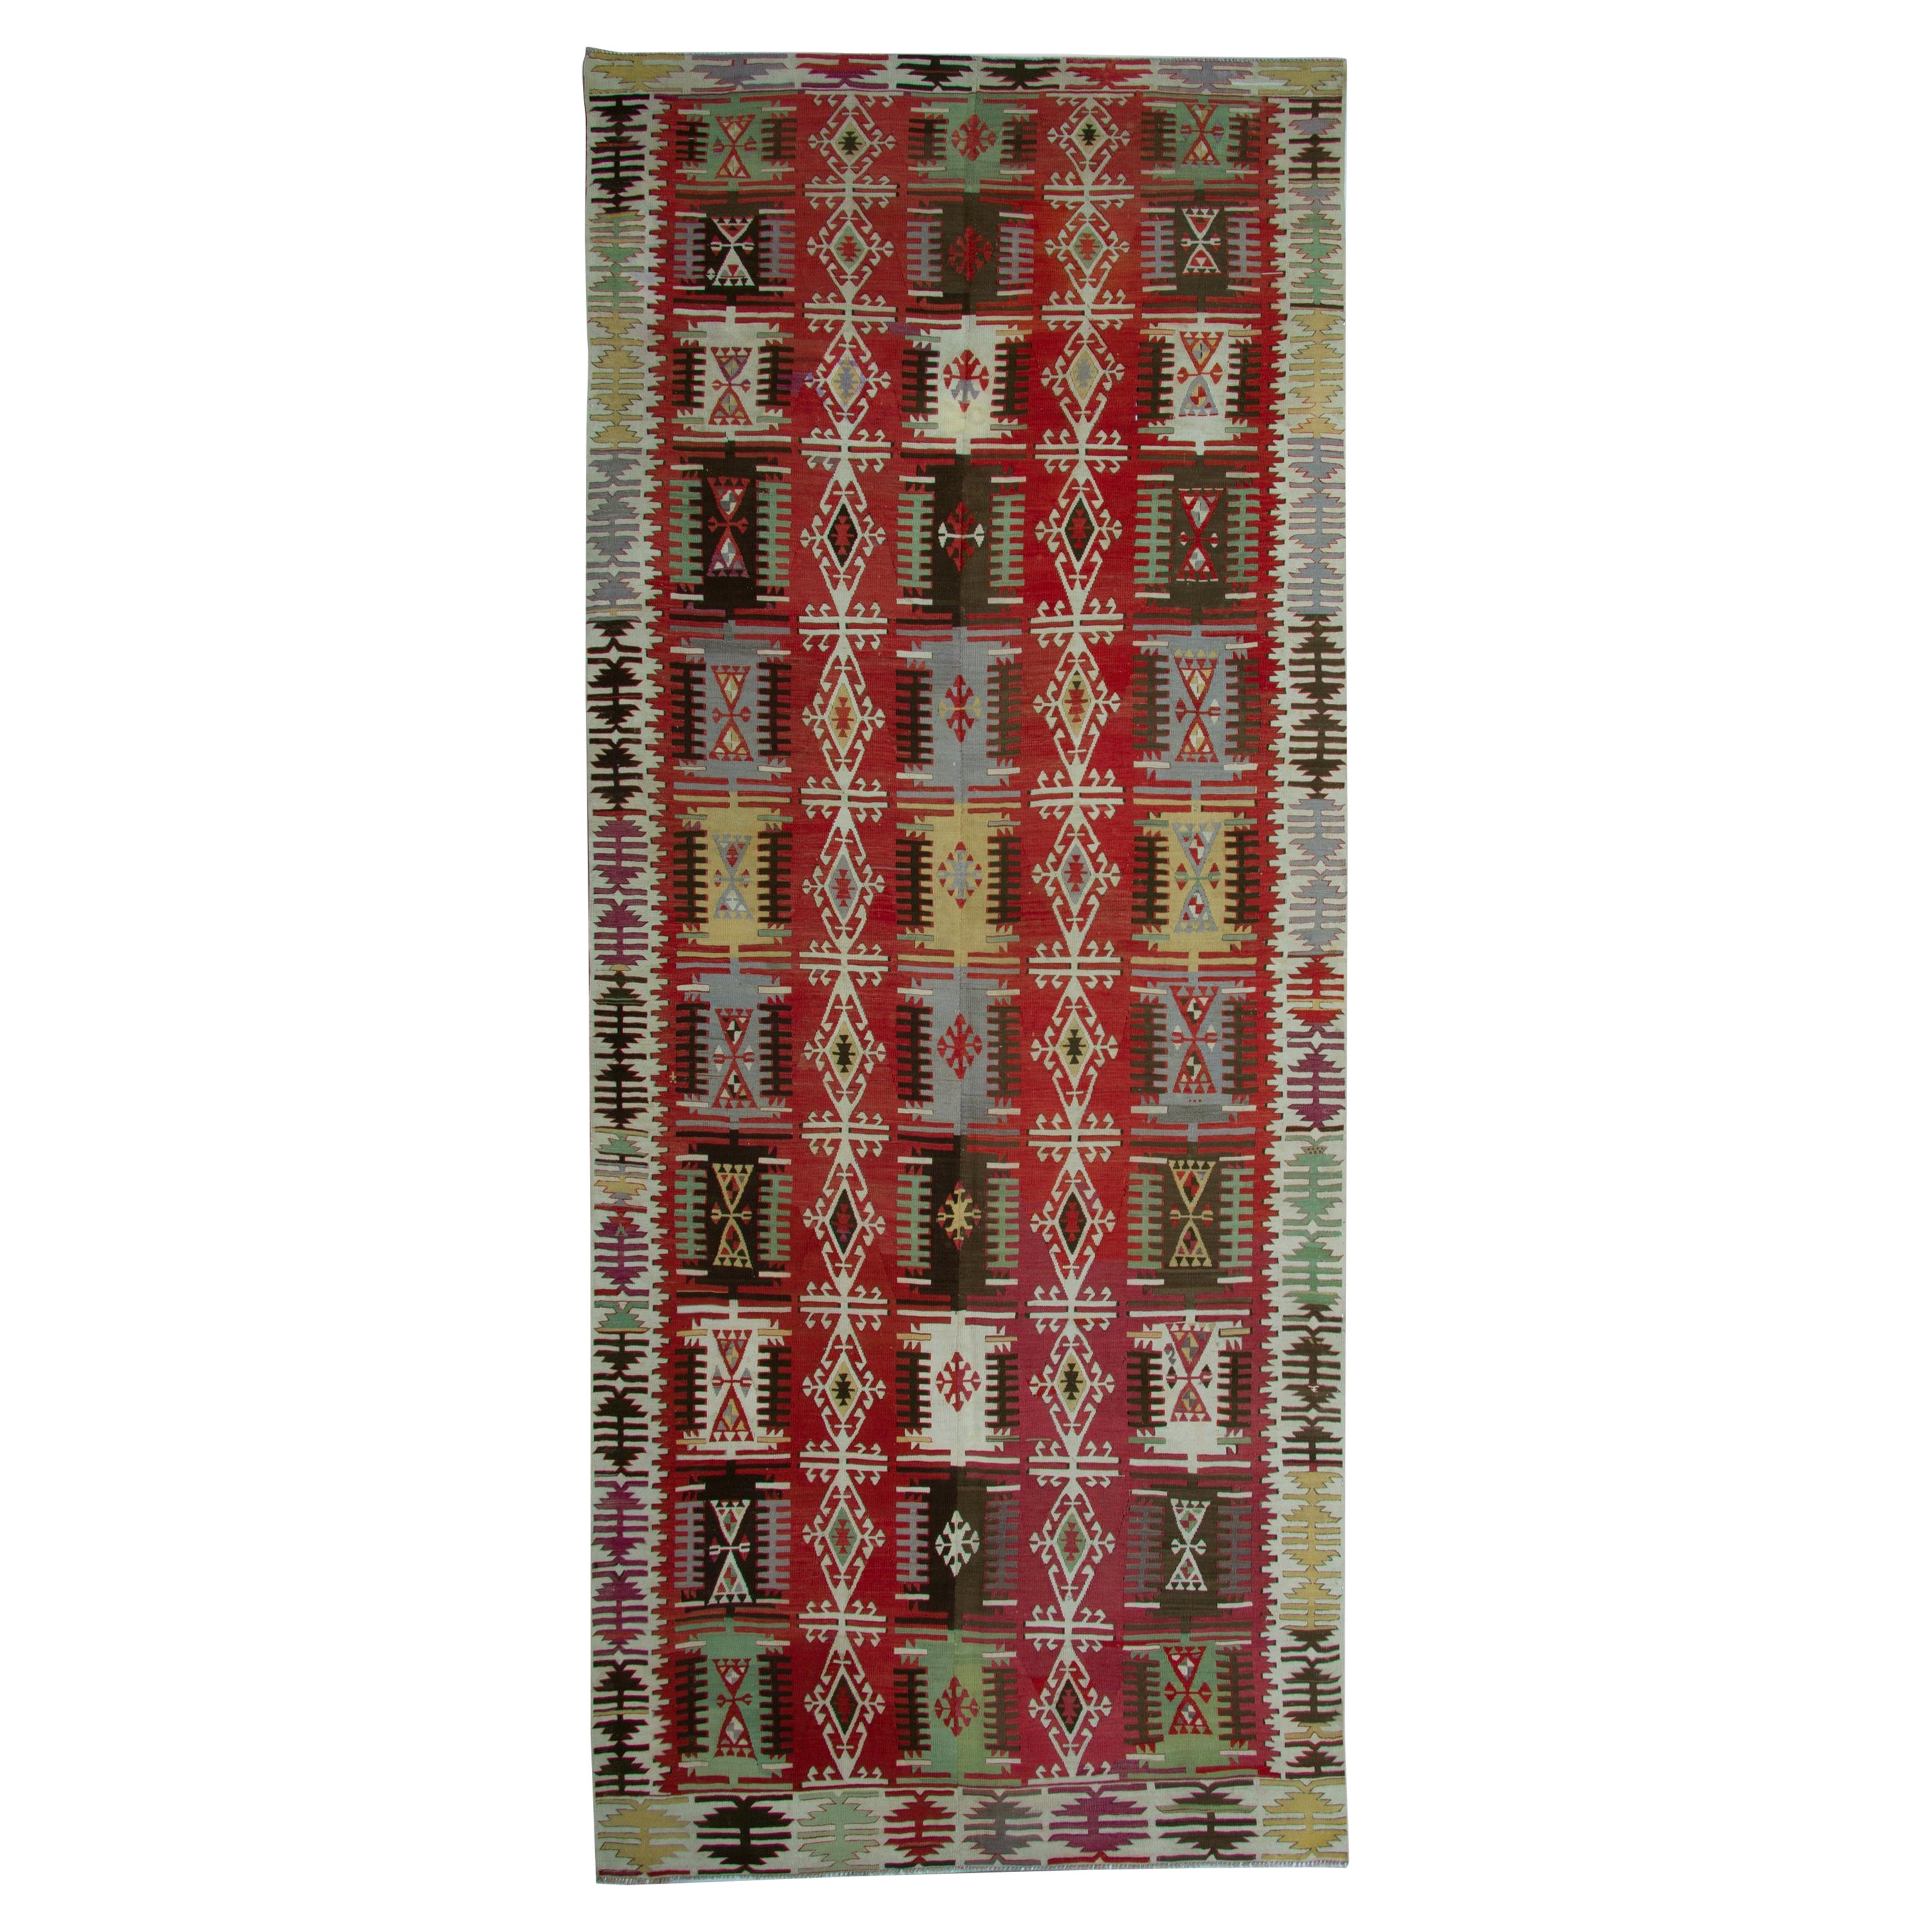 Handmade Carpet Kilim Rugs, Oriental Rugs from Turkey, Turkish Rugs for Sale For Sale